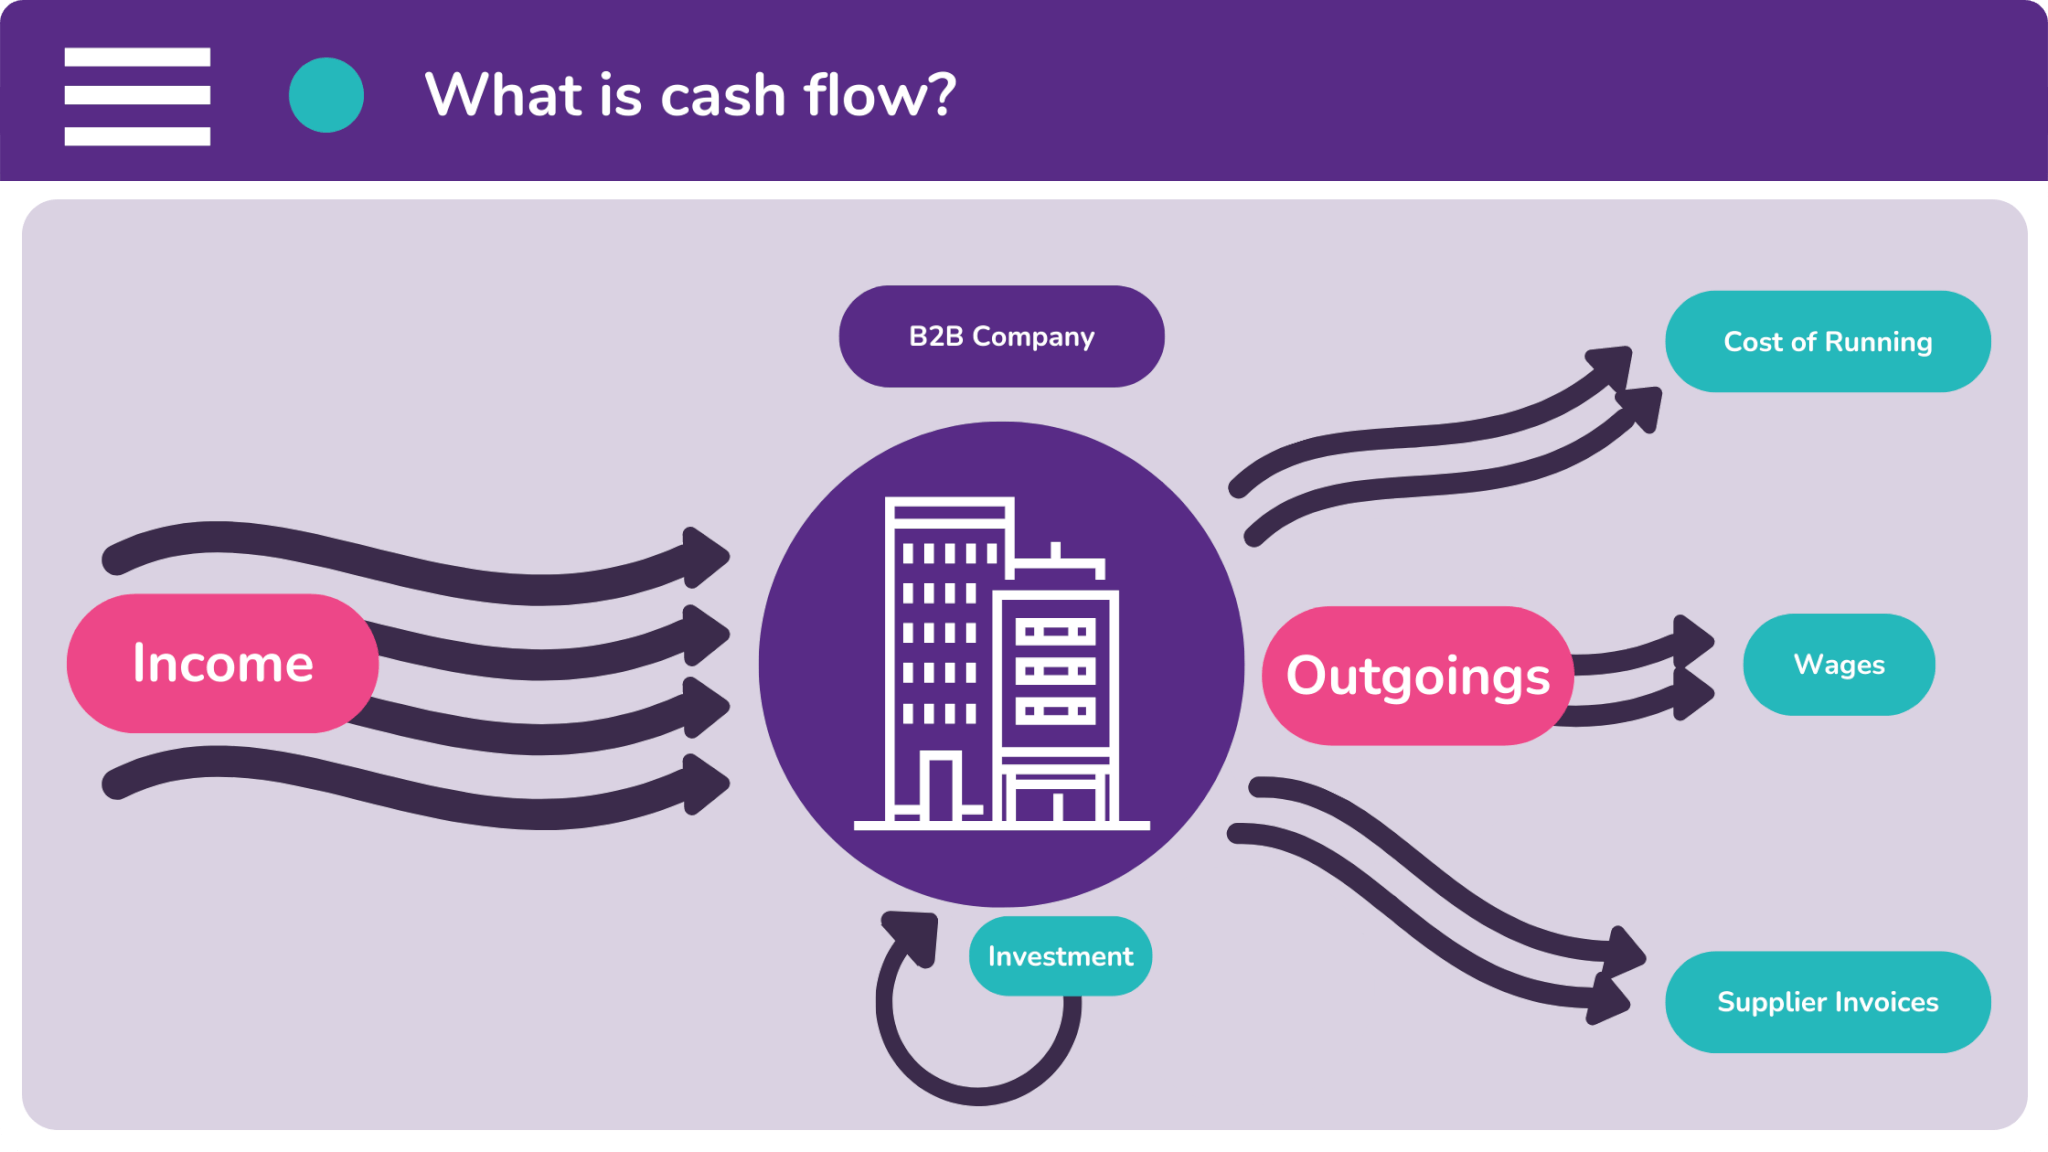 Cash flow refers to the flow of money through your business.